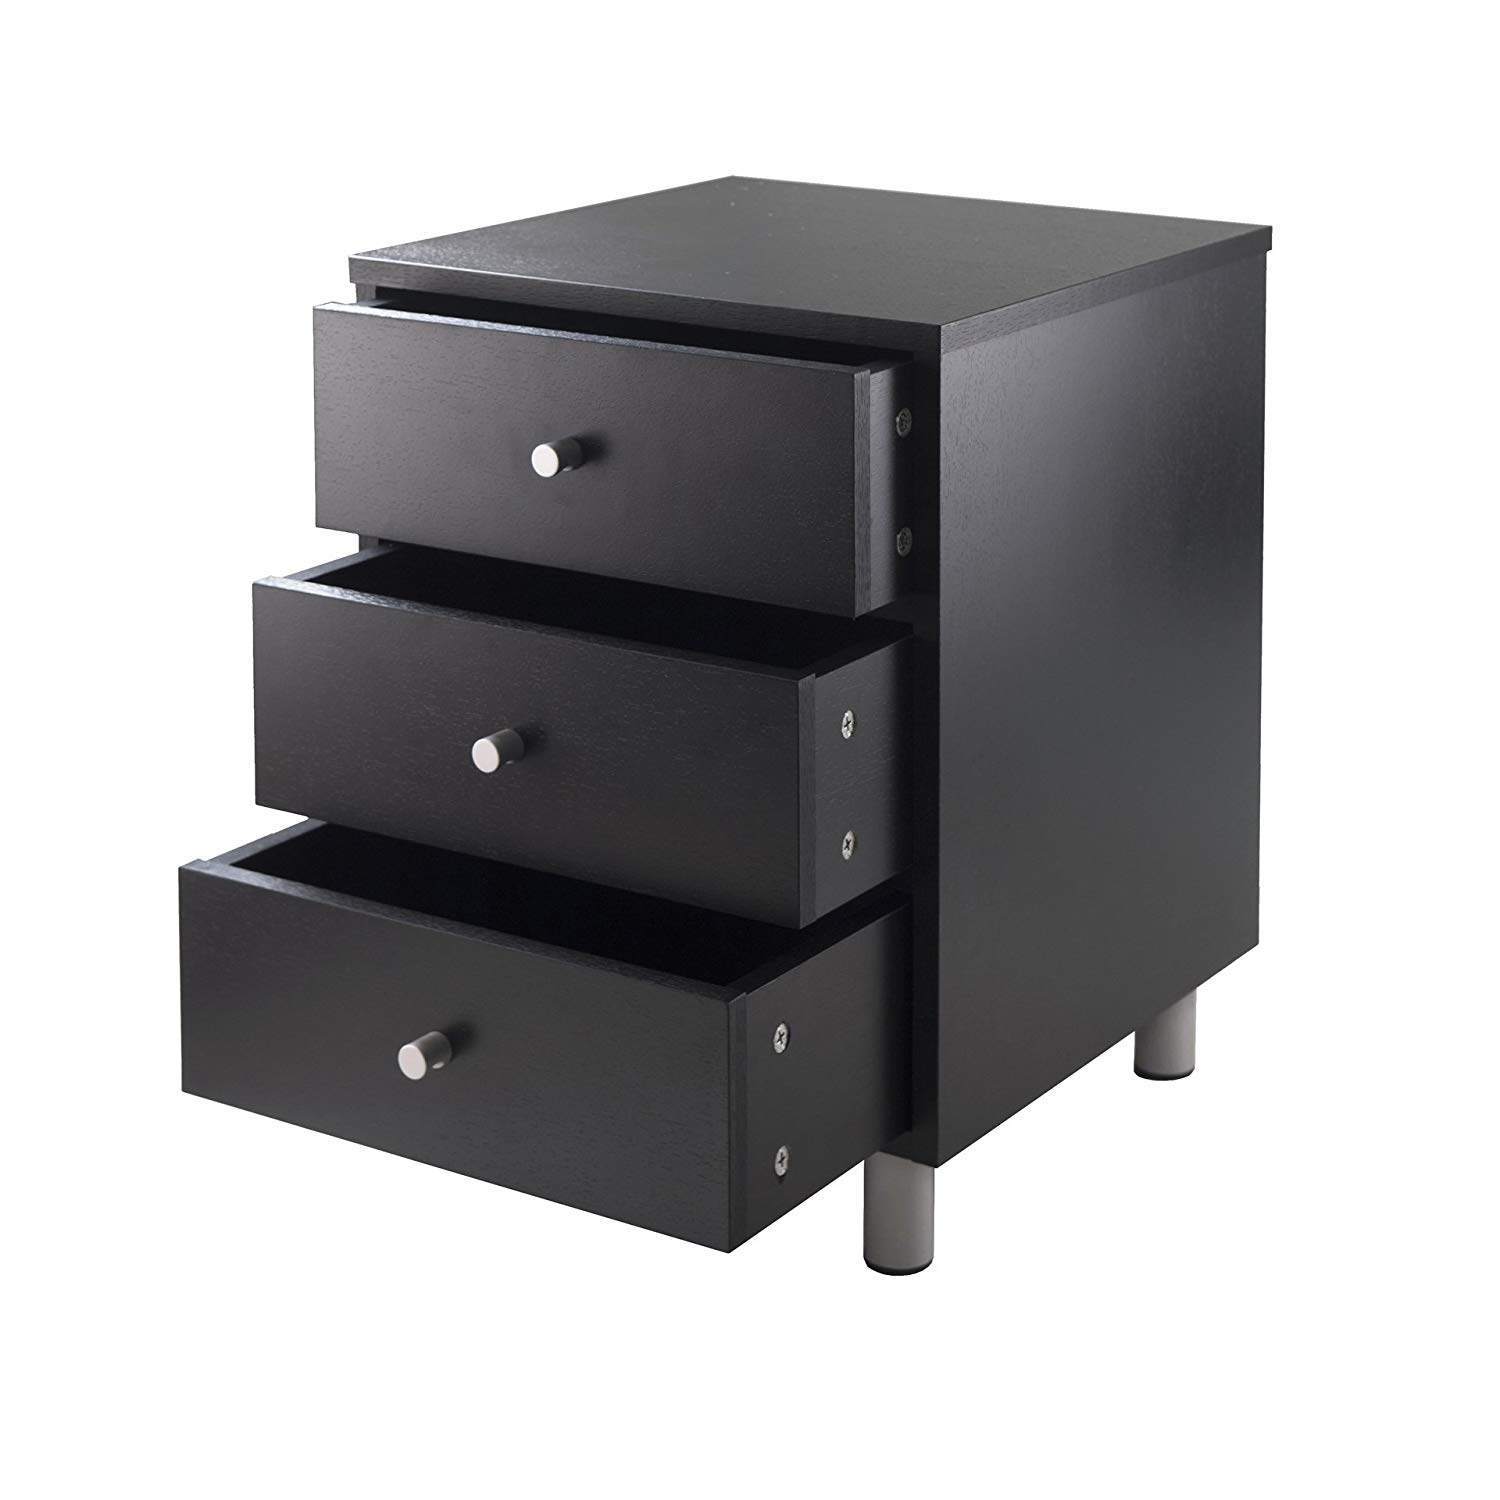 winsome daniel accent table with drawer black finish timmy kitchen dining high end tables pedestal side ikea sofa patio grill brass glass top kids nightstand battery operated desk